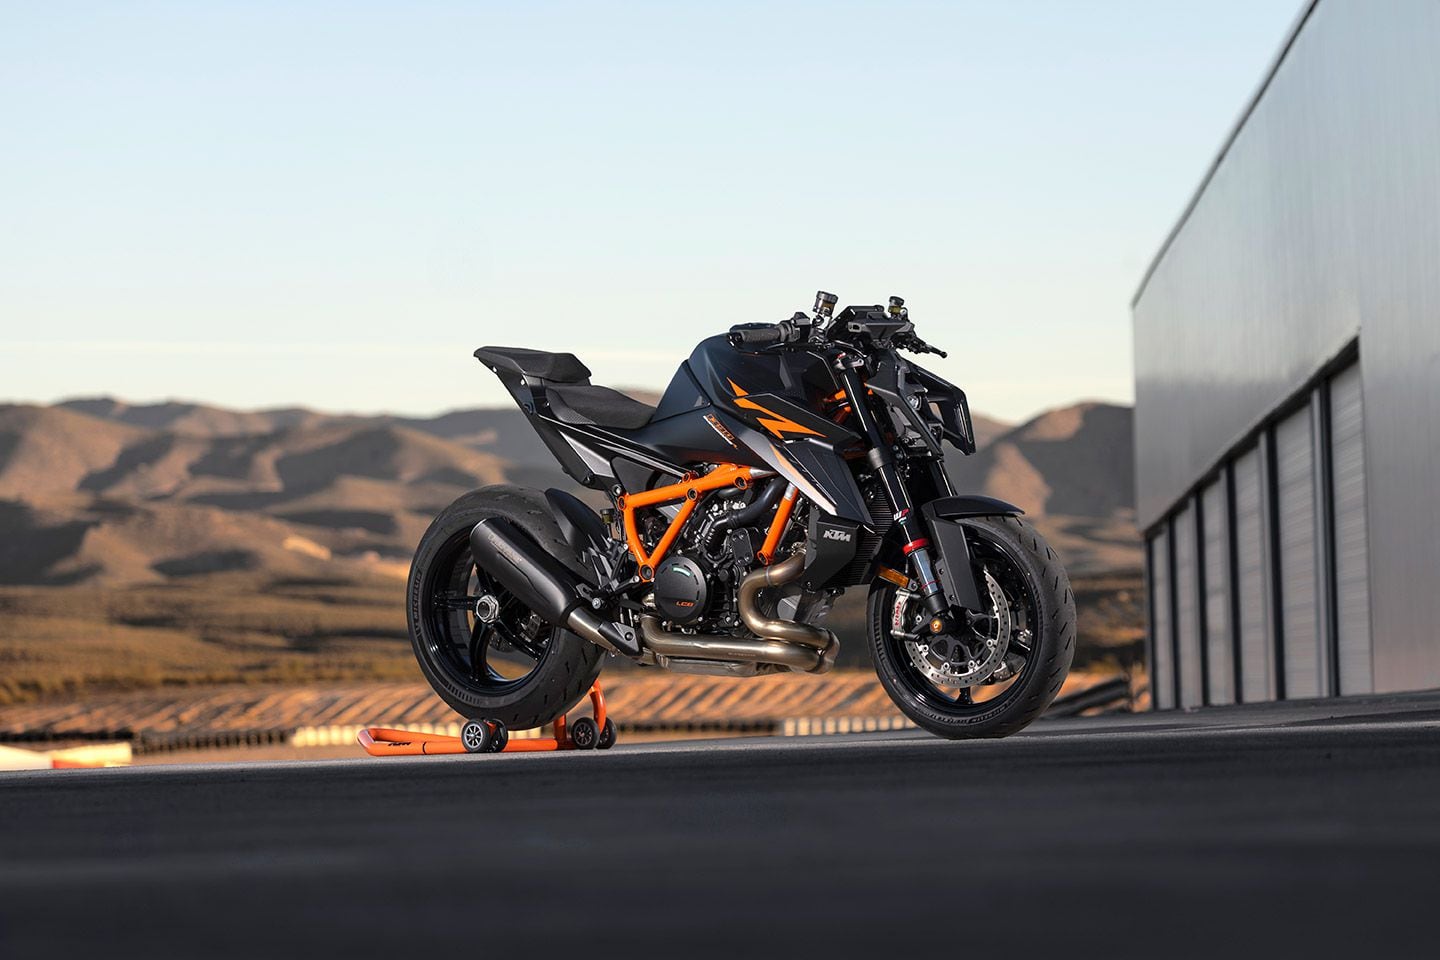 The Super Duke isn’t short on sharp lines. Notice the low handlebar, which KTM transitioned to years back for a more aggressive riding position. Despite the low bar, this is still a very comfortable motorcycle.